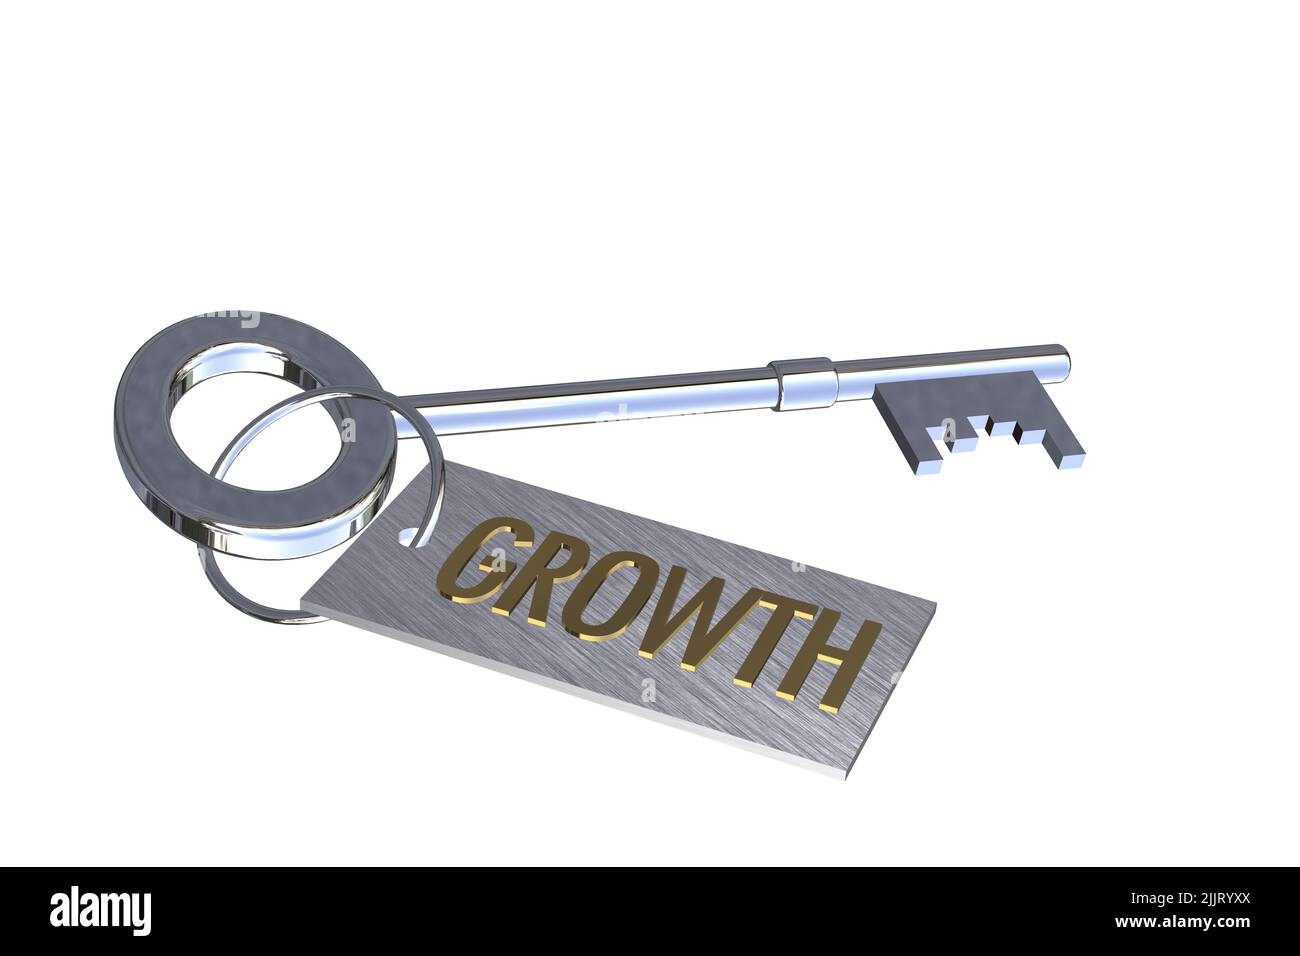 key to growth concept silver 3D key with key ring tag with text word words growth concept cut out isolated on white background Stock Photo